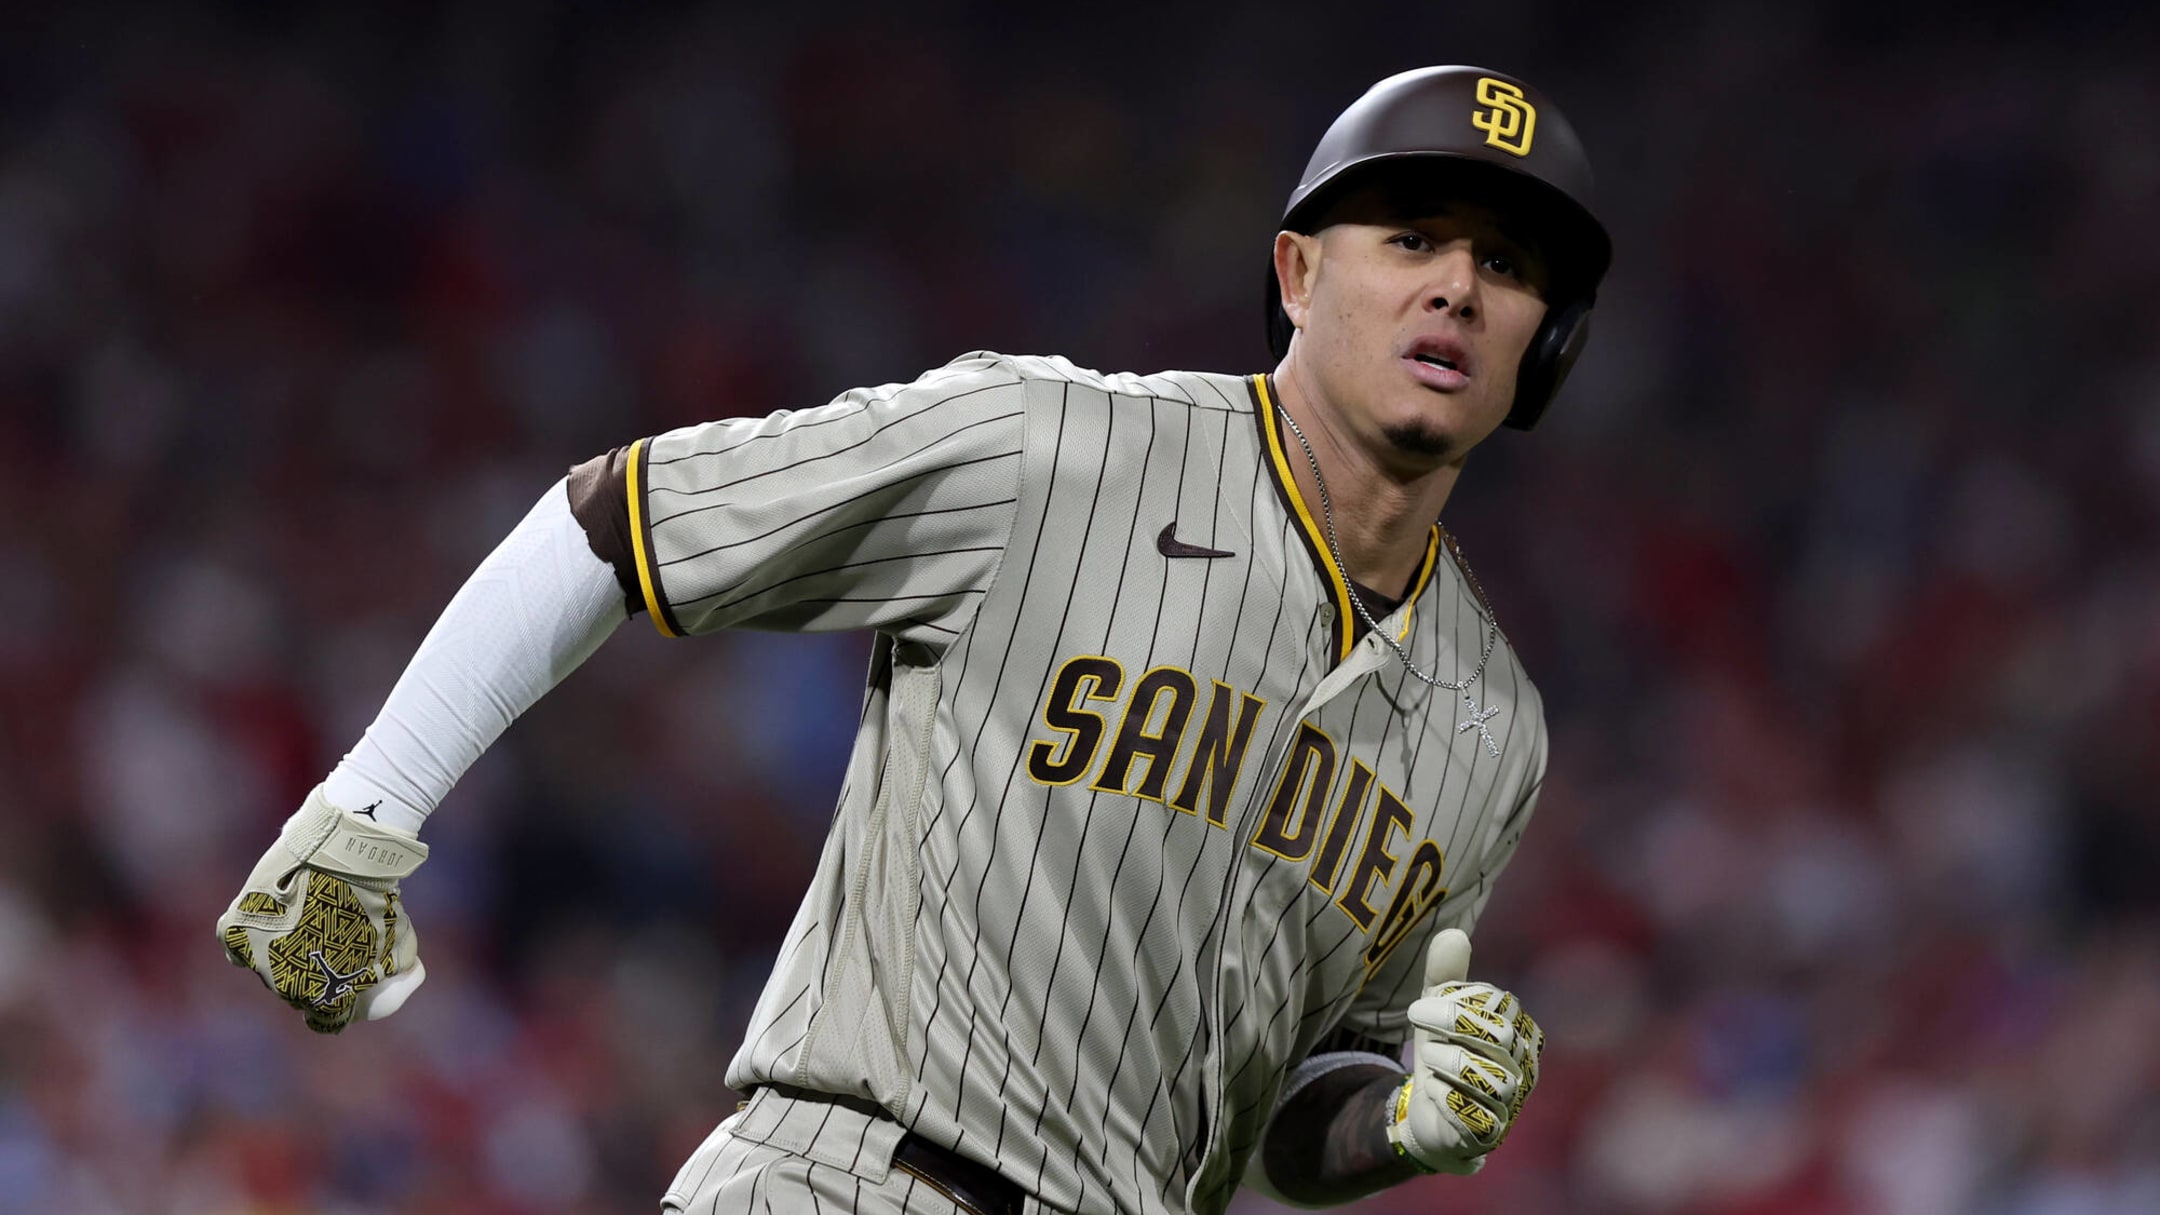 Manny Machado's potential contract opt-out looms over Padres - The